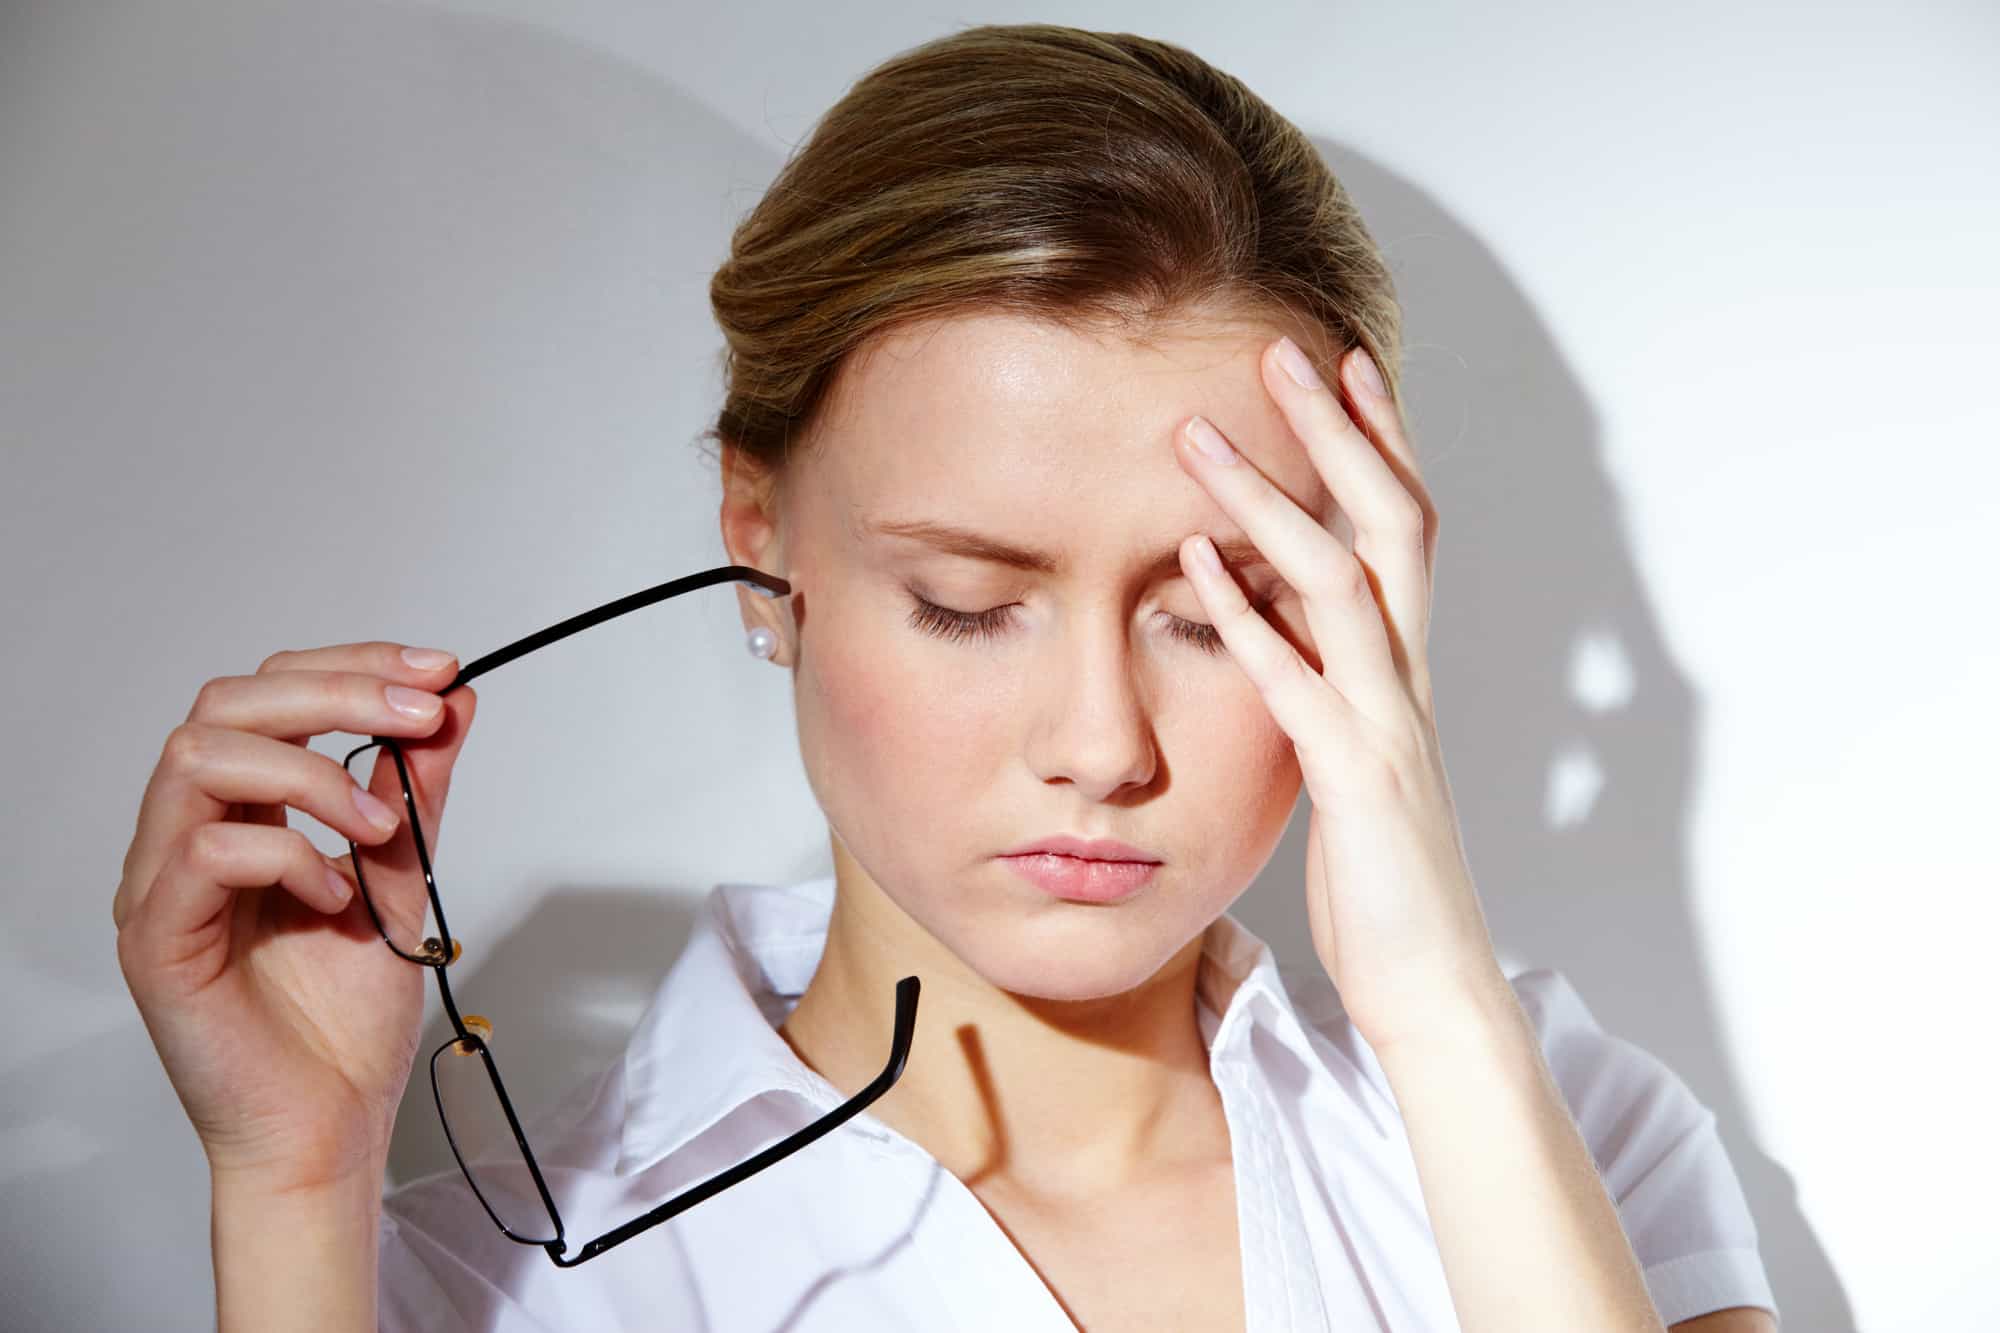 Chiropractic Adjustments Improve Migraines... Migraine sufferers benefit from cutting edge research